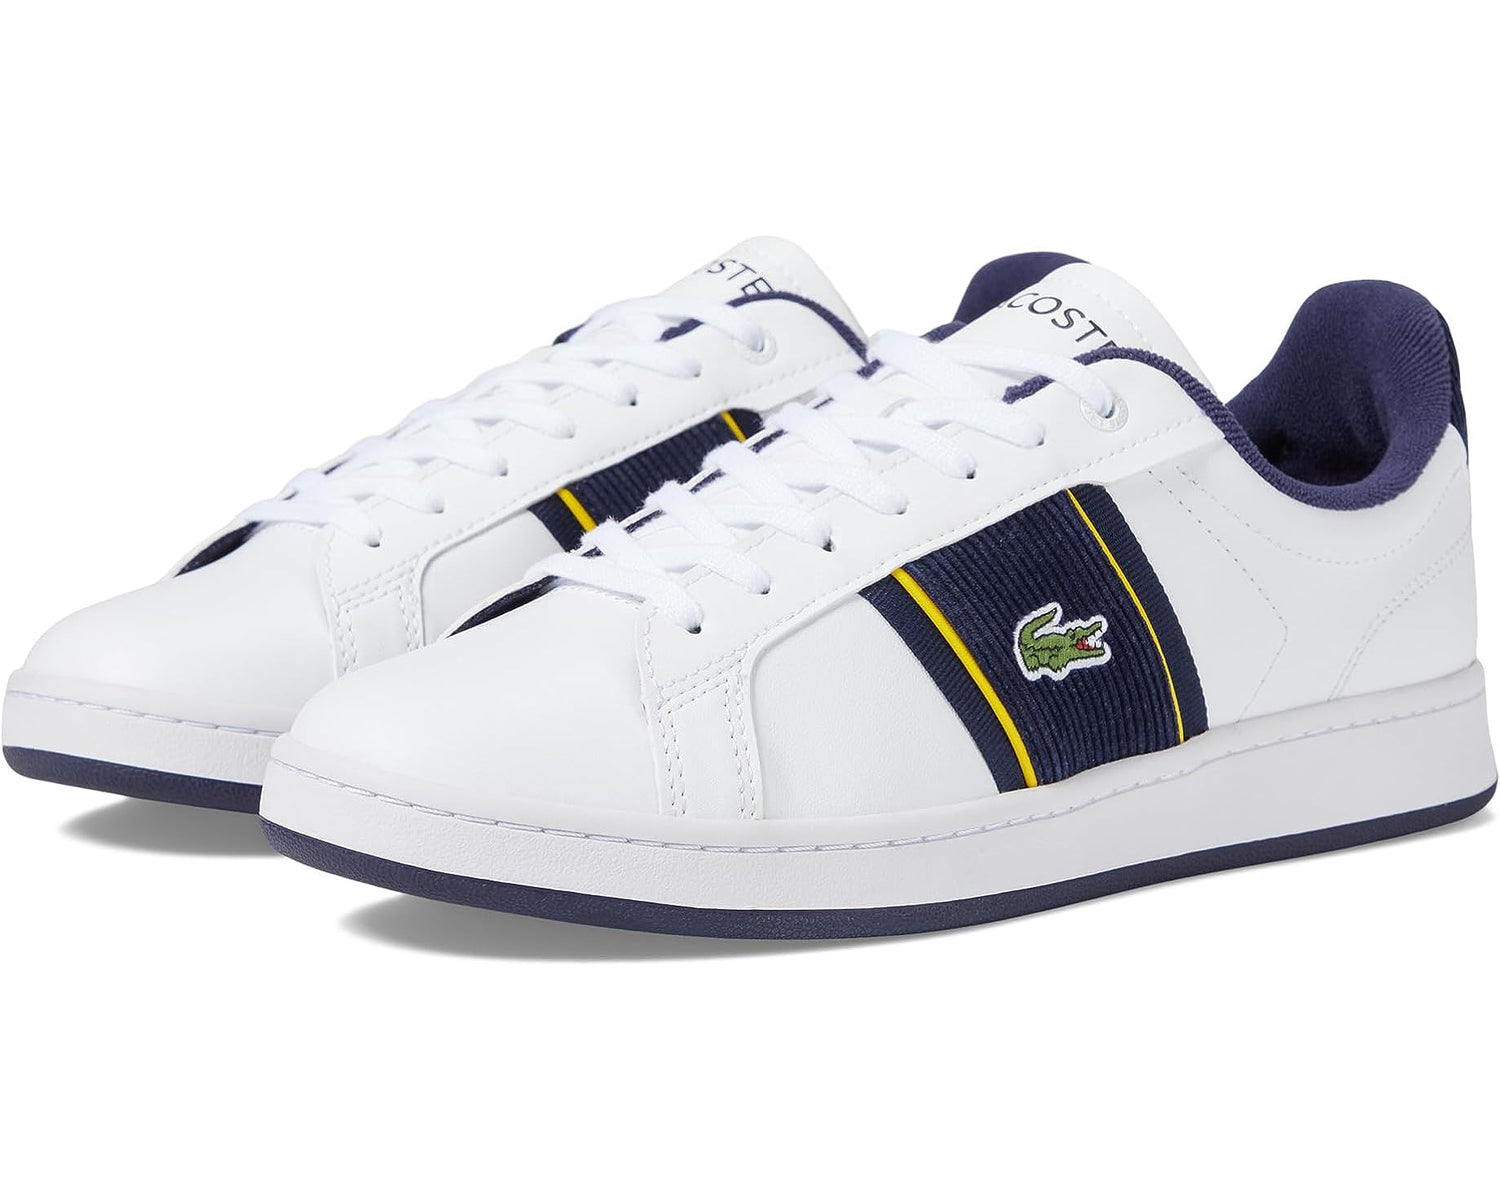 Buy Lacoste Mens Twin Serve Trainers White/Yellow